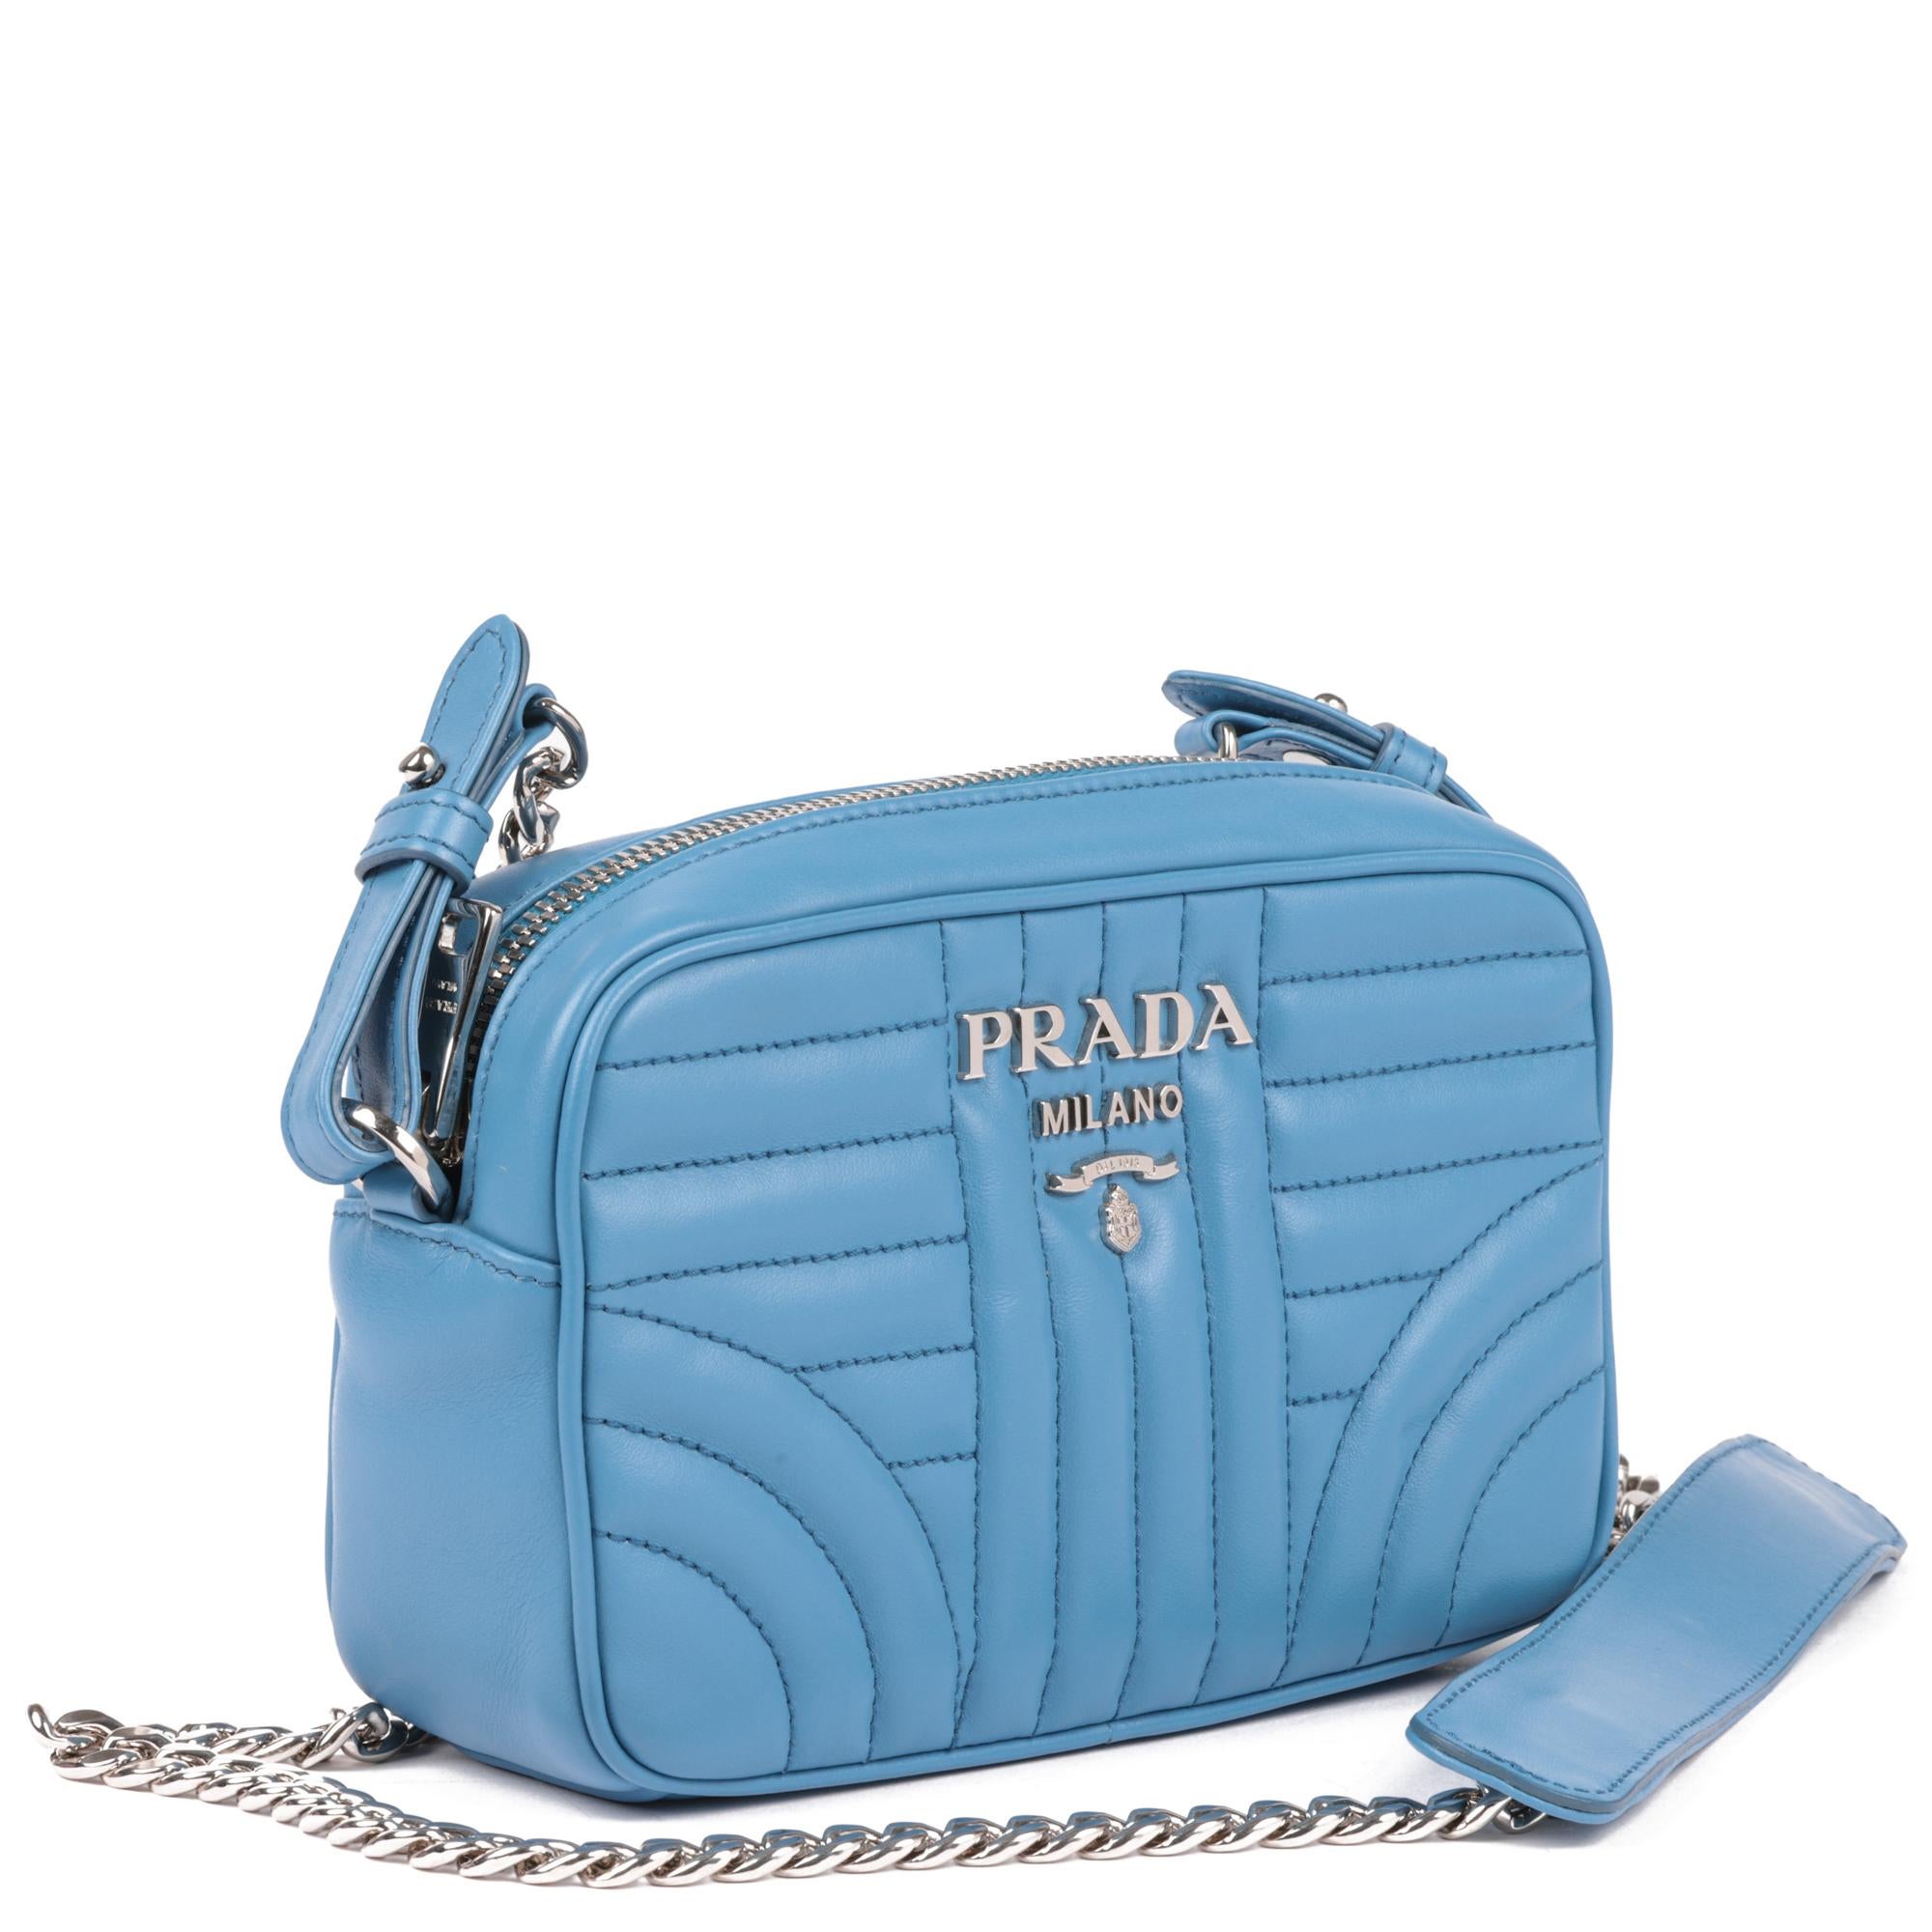 PRADA
Blue Quilted Calfskin Leather Diagramme Camera Bag

Xupes Reference: CB843
Serial Number: 260
Age (Circa): 2018
Accompanied By: Prada Dust Bag, Authenticity Card
Authenticity Details: Date Stamp (Made in Italy)
Gender: Ladies
Type: Shoulder,